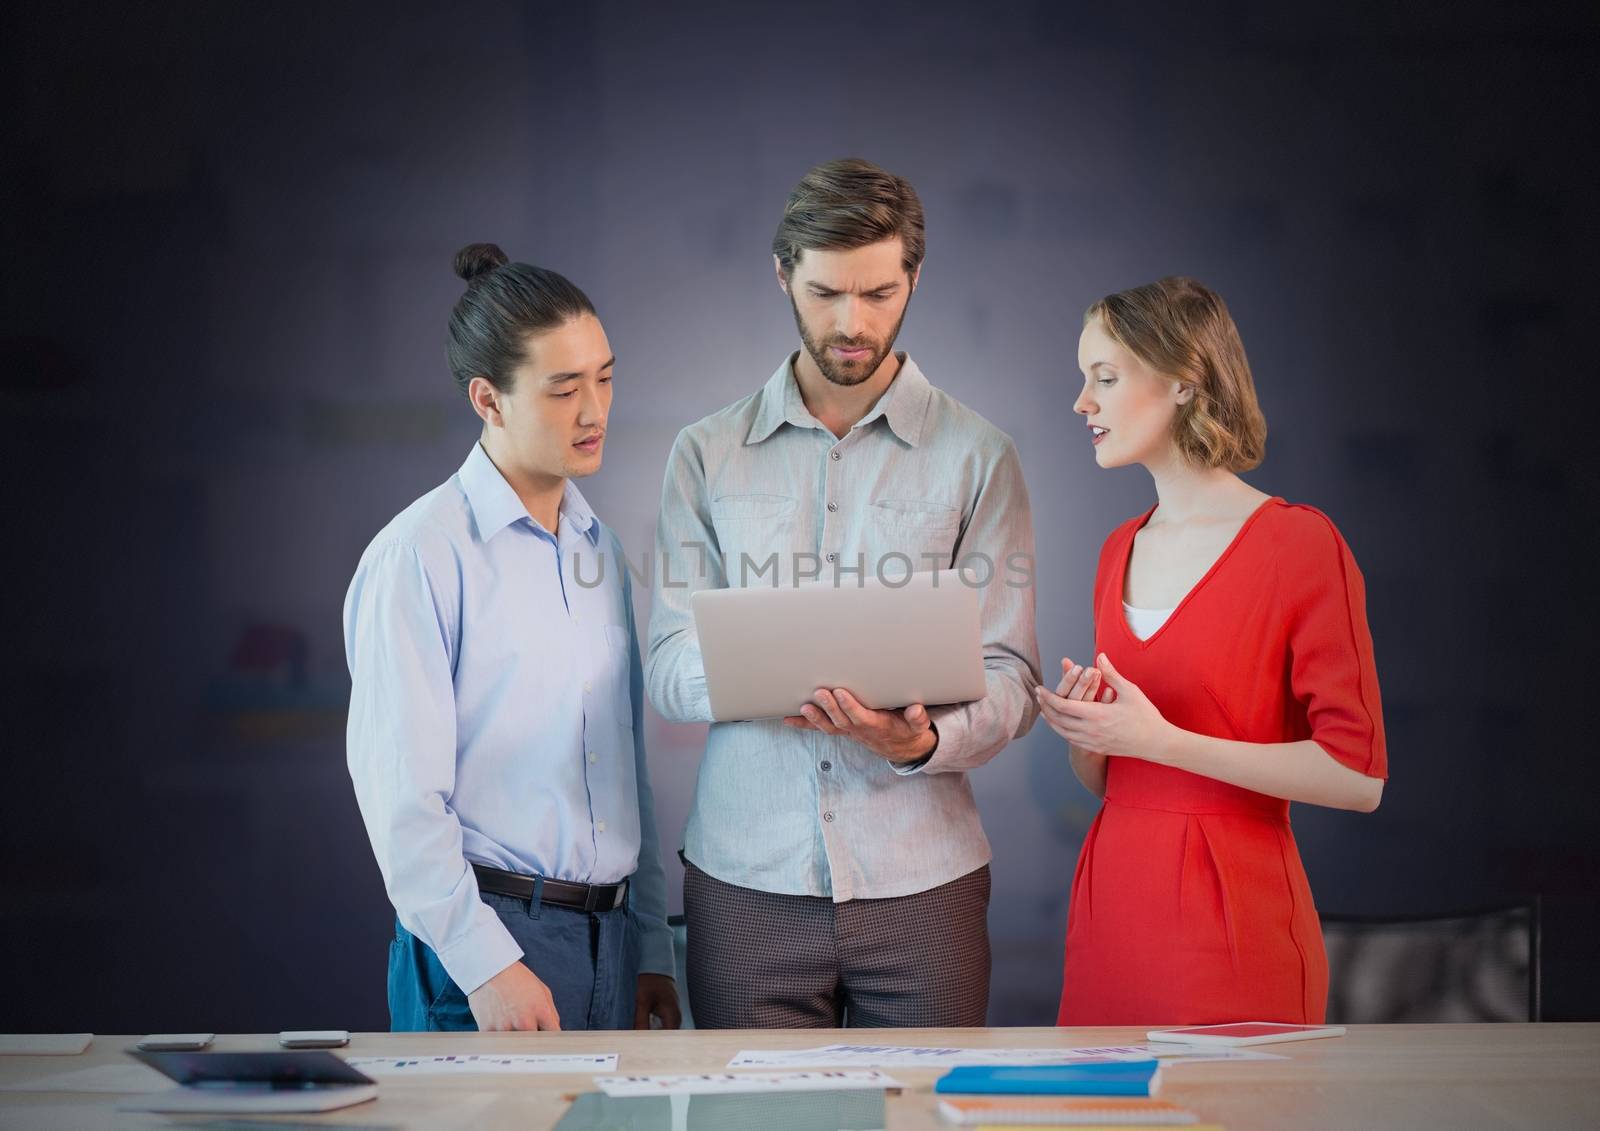 Digital composite of Business people working on laptop